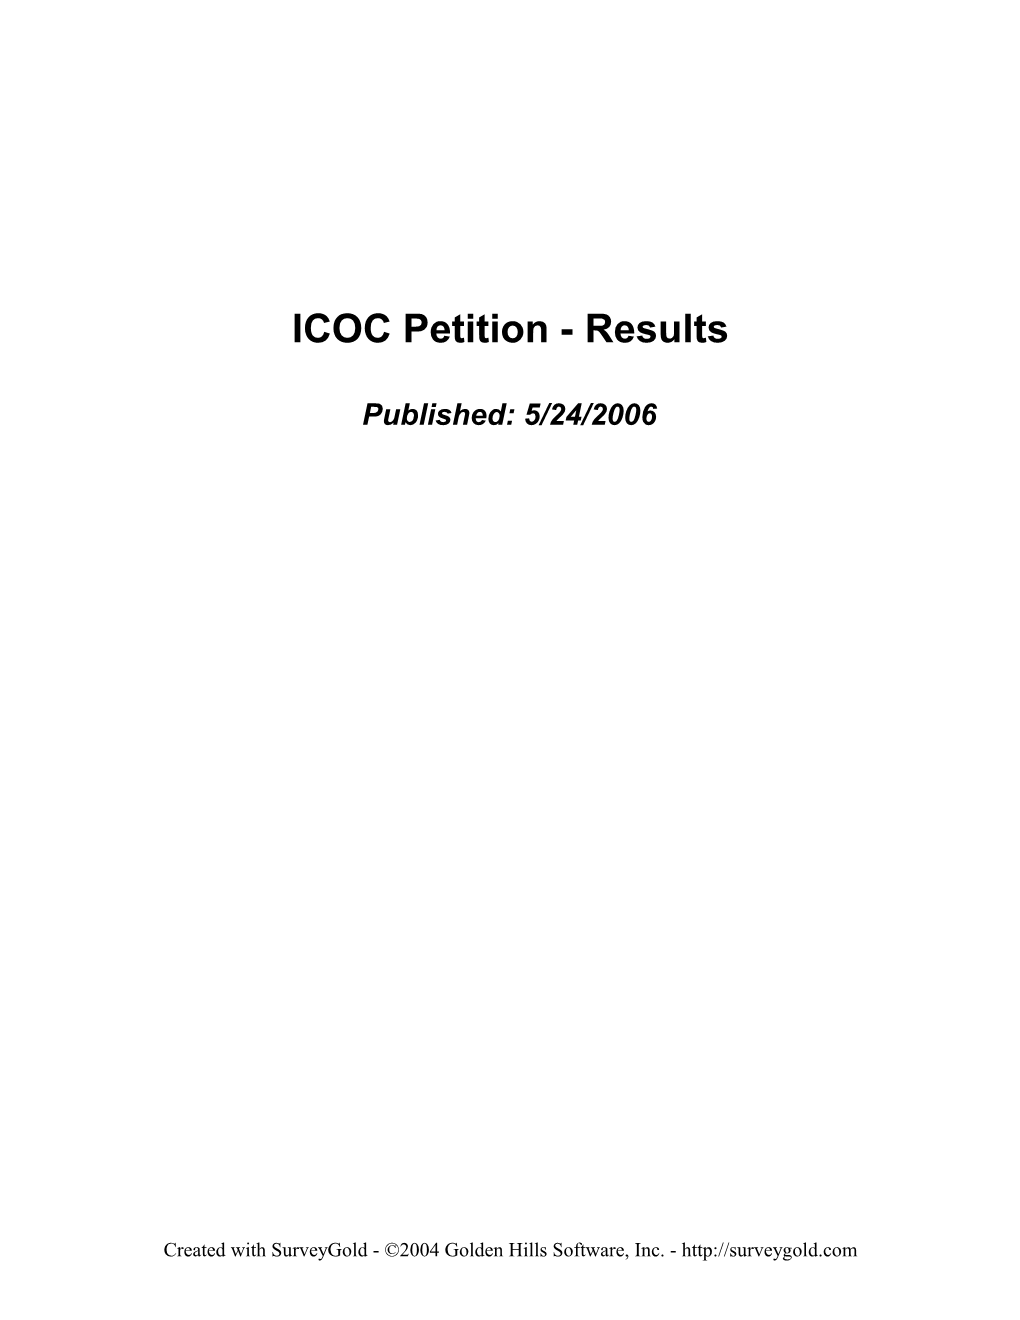 ICOC Petition - Results